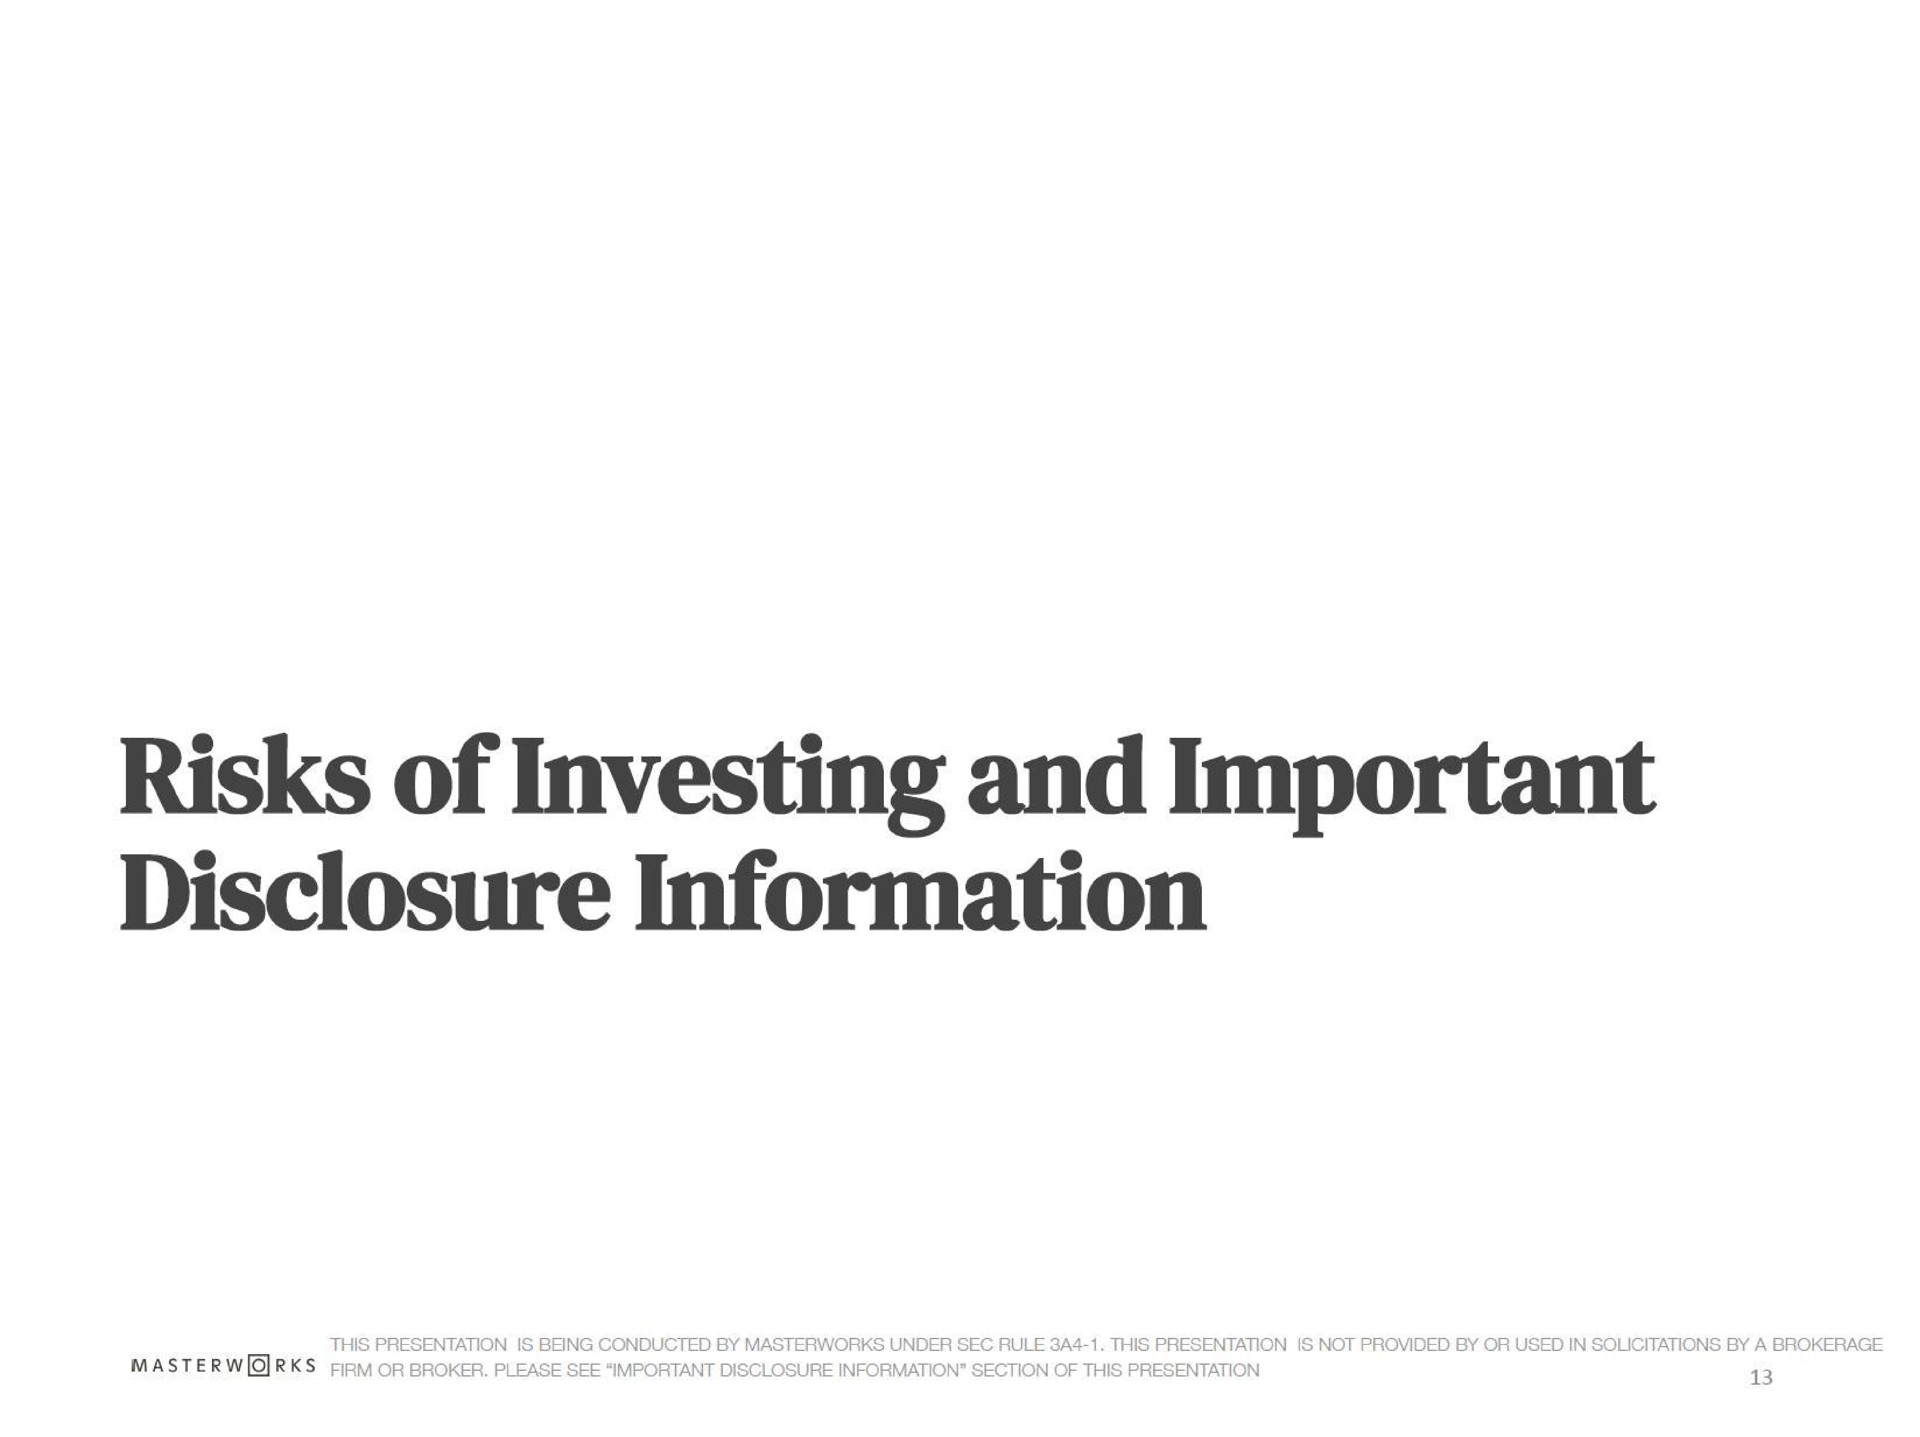 risks of investing and important disclosure information | Masterworks